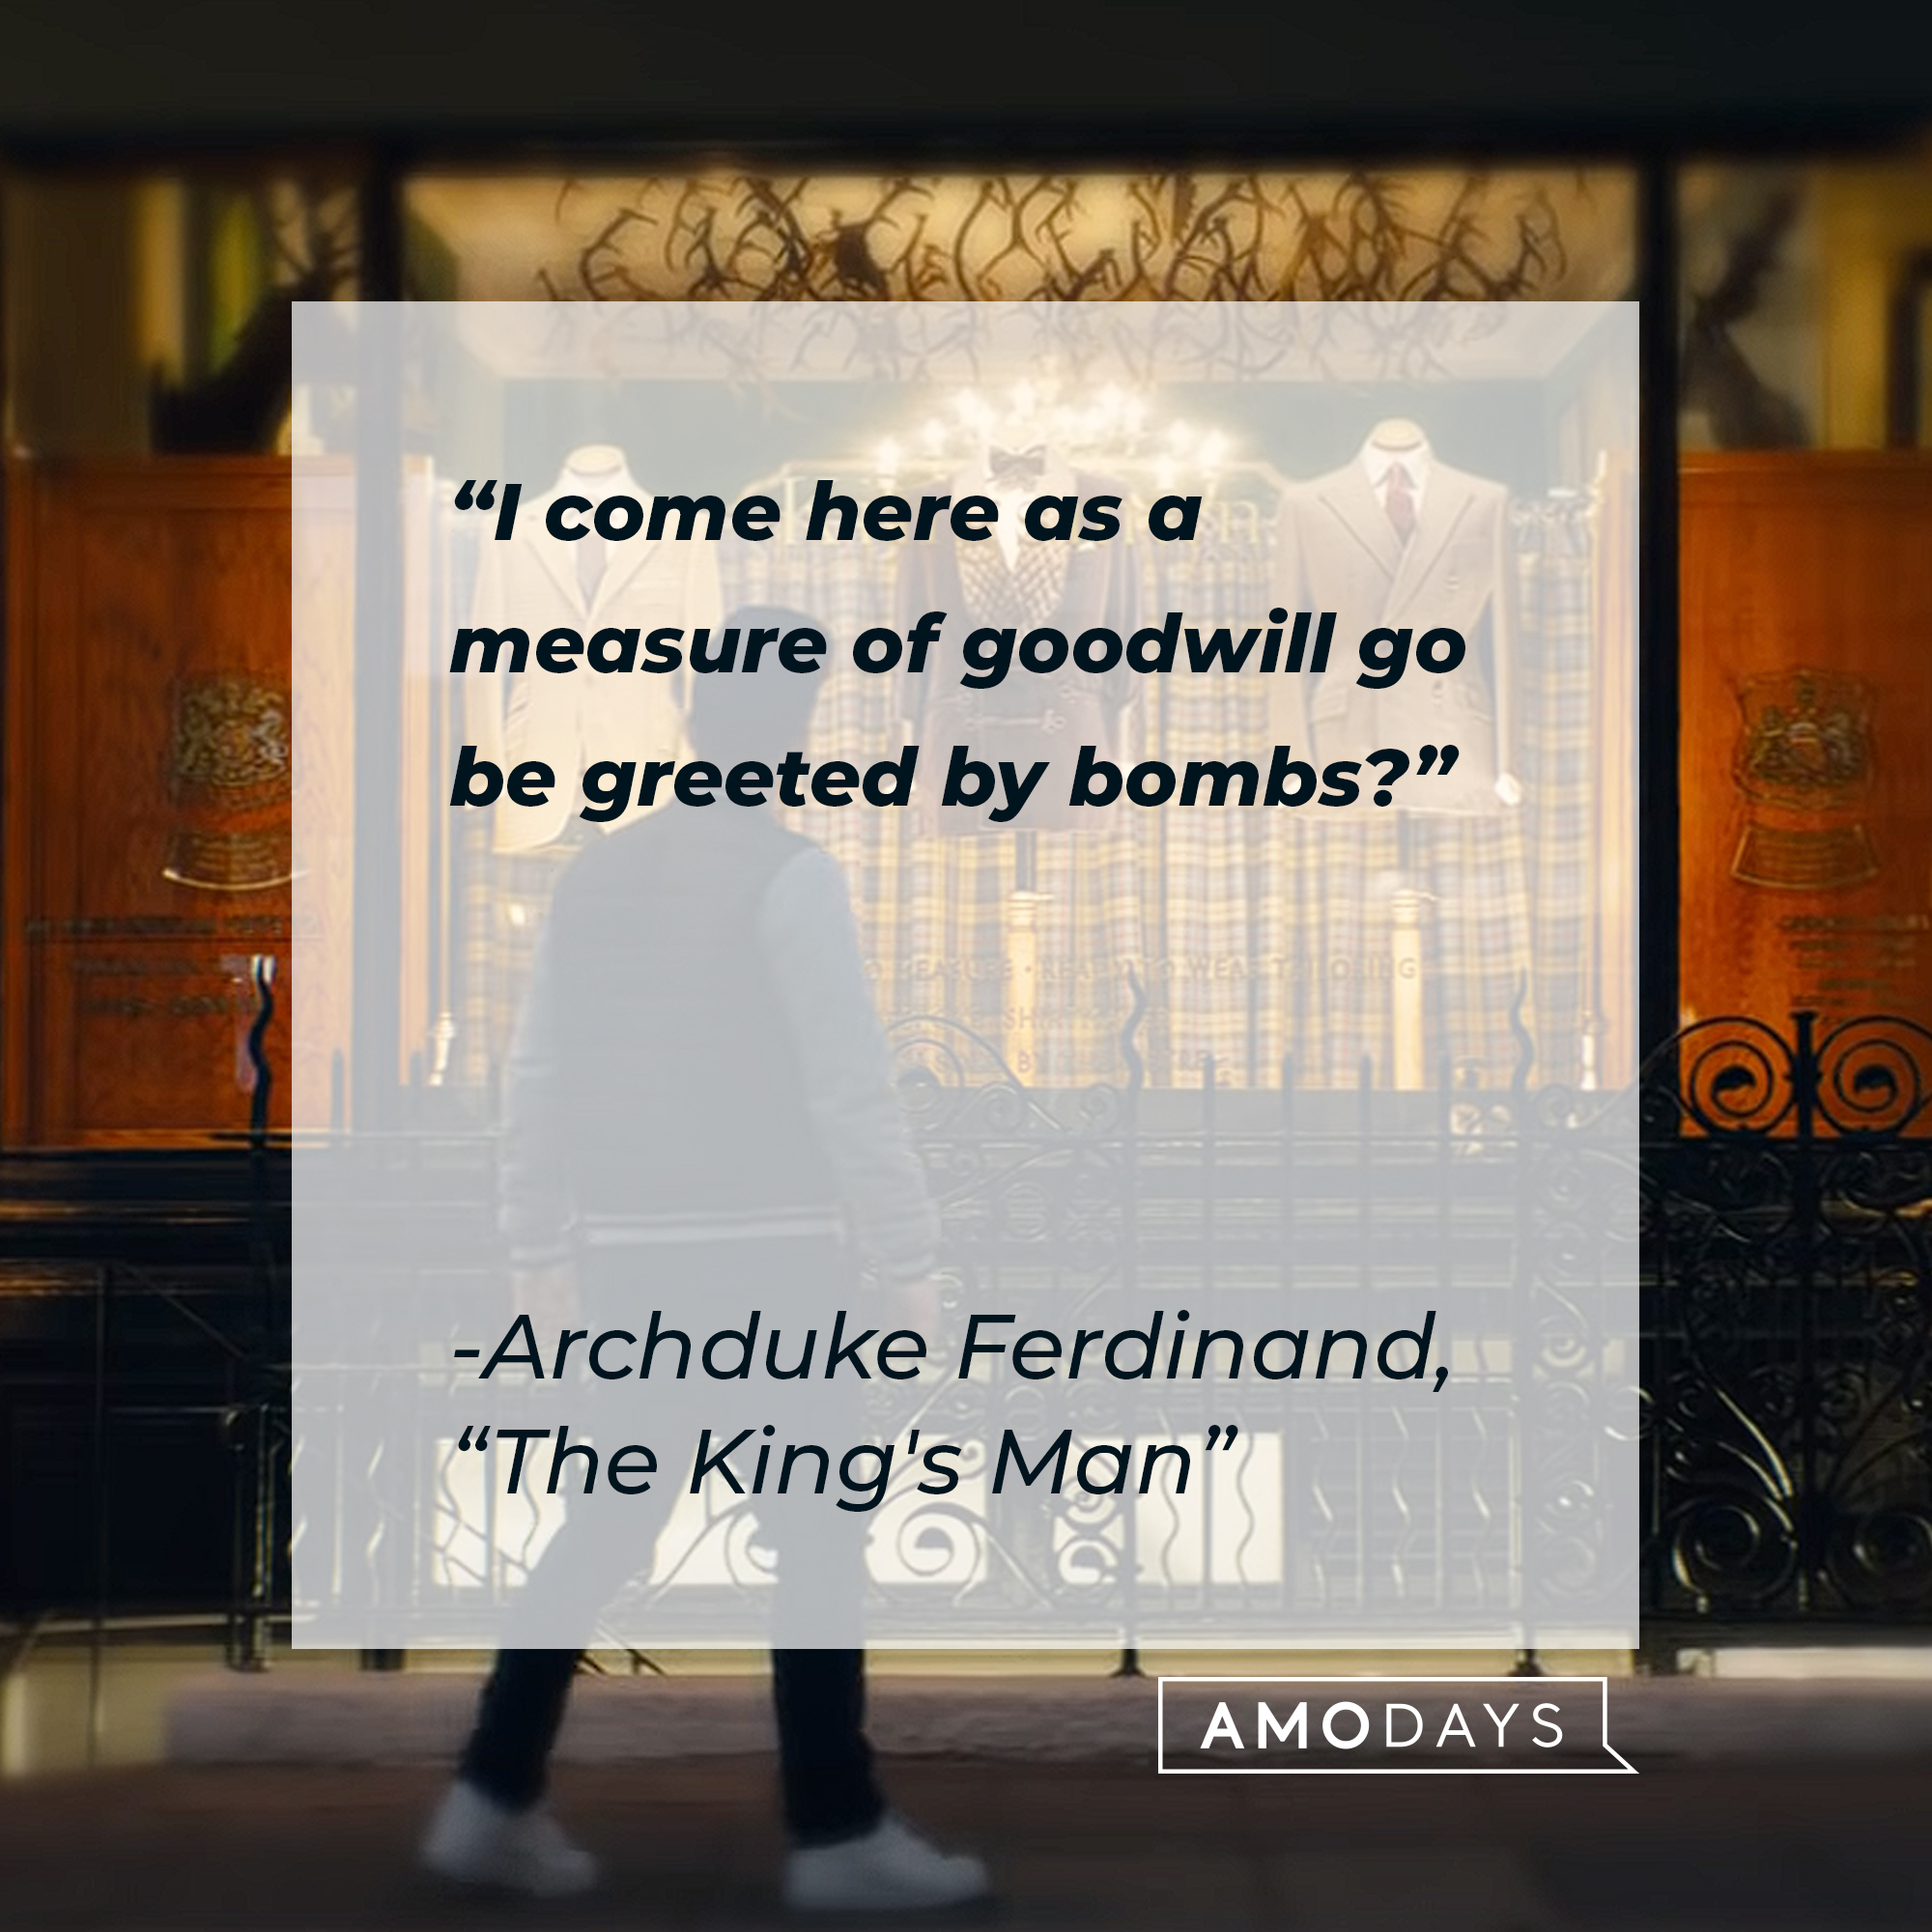 Archduke Ferdinand's quote: "I Come Here As A Measure Of Goodwill To Be Greeted By Bombs?" | Image: YouTube / 20thCenturyStudios